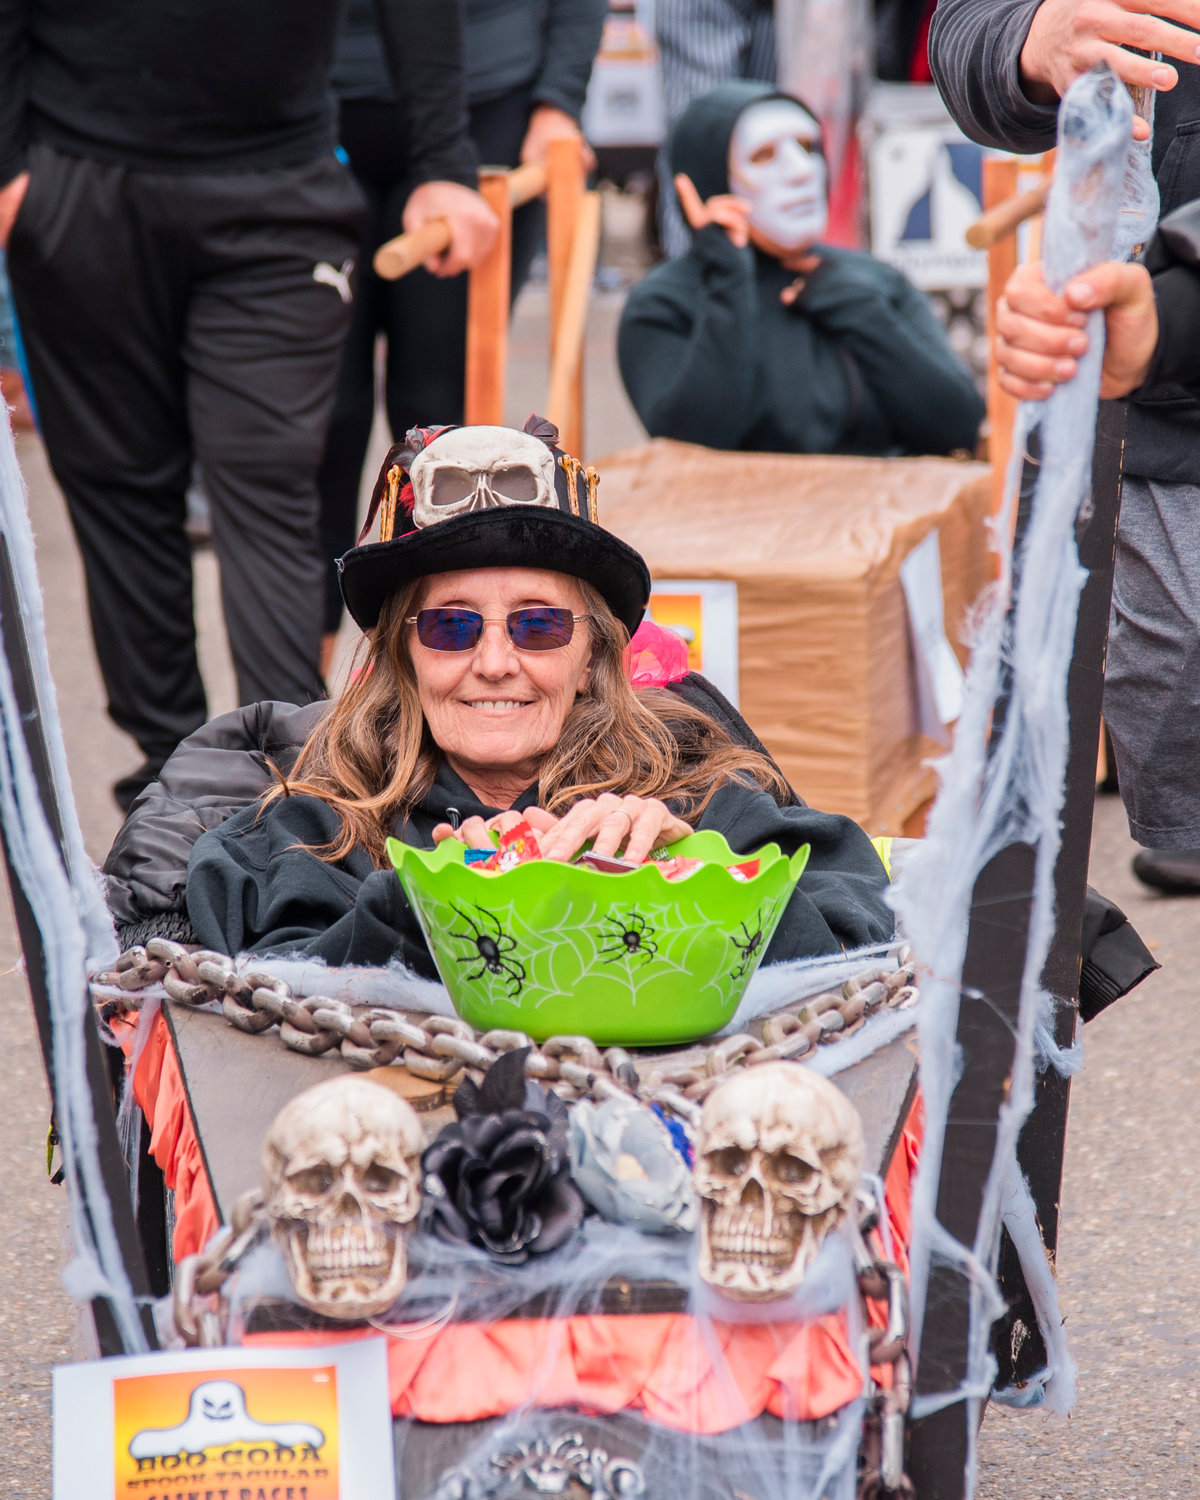 Robin Greene, with Joe’s Place, smiles while holding a bucket of candy in a pine box during the Casket Parade before taking first in the Casket Races event on Saturday.